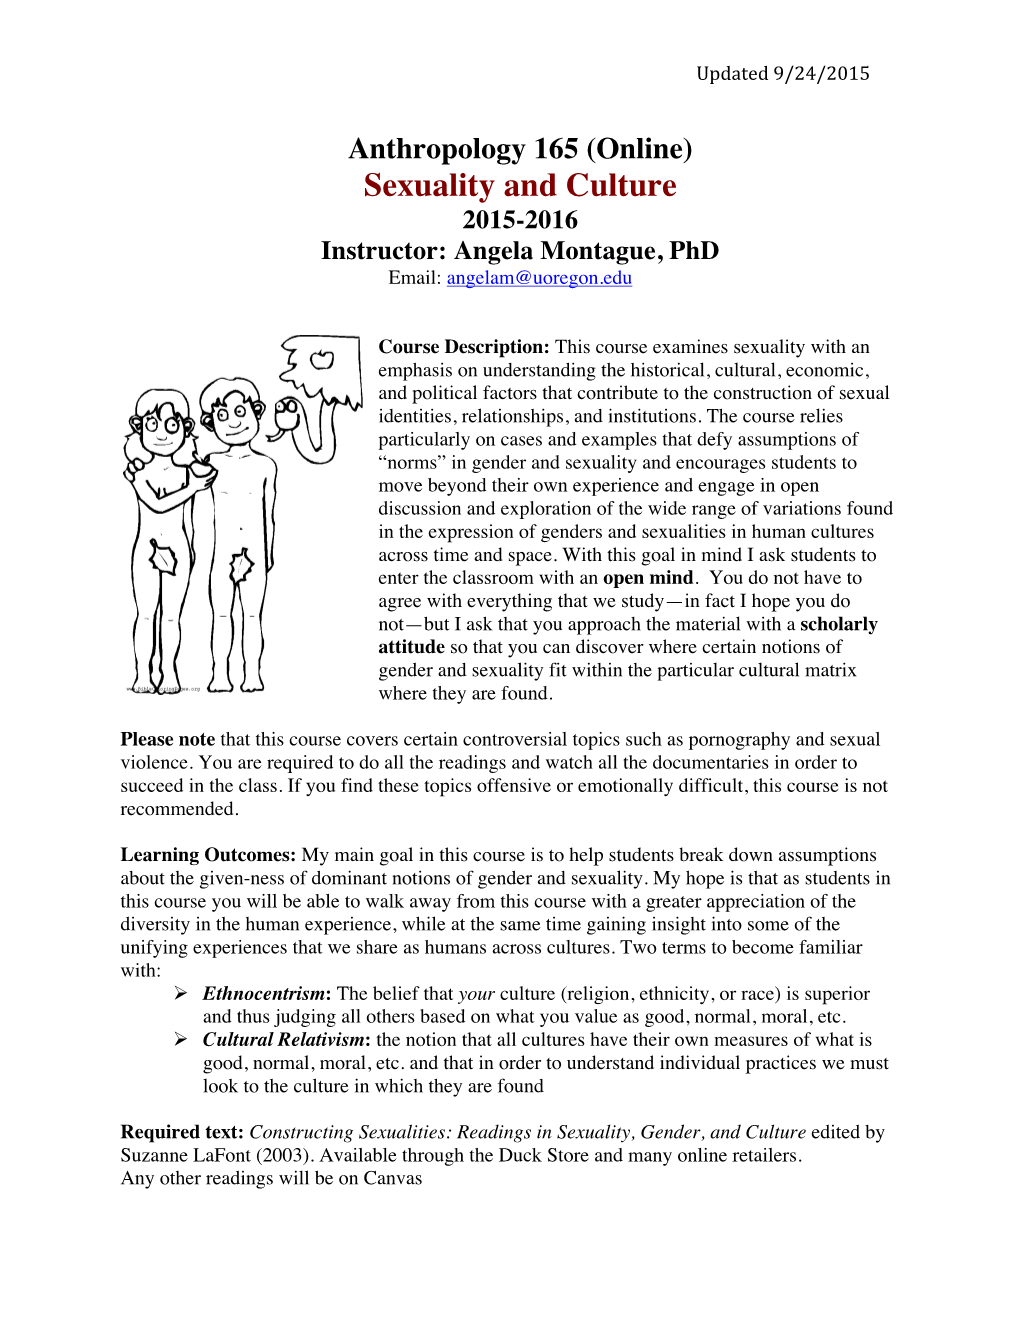 Sexuality and Culture 2015-2016 Instructor: Angela Montague, Phd Email: Angelam@Uoregon.Edu